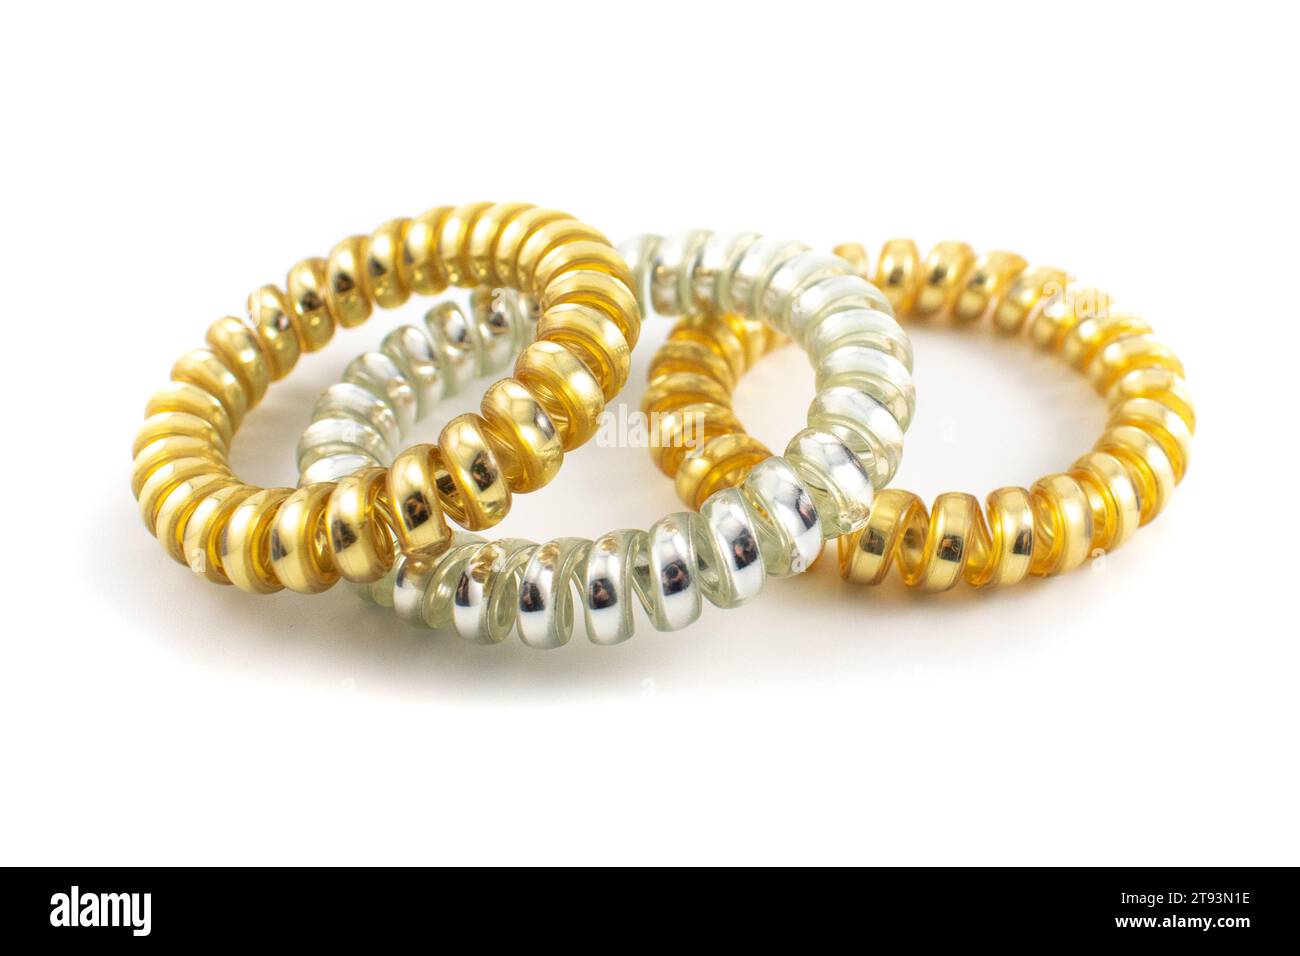 Close up photo of three metallic gold and silver plastic spiral hair ties Stock Photo